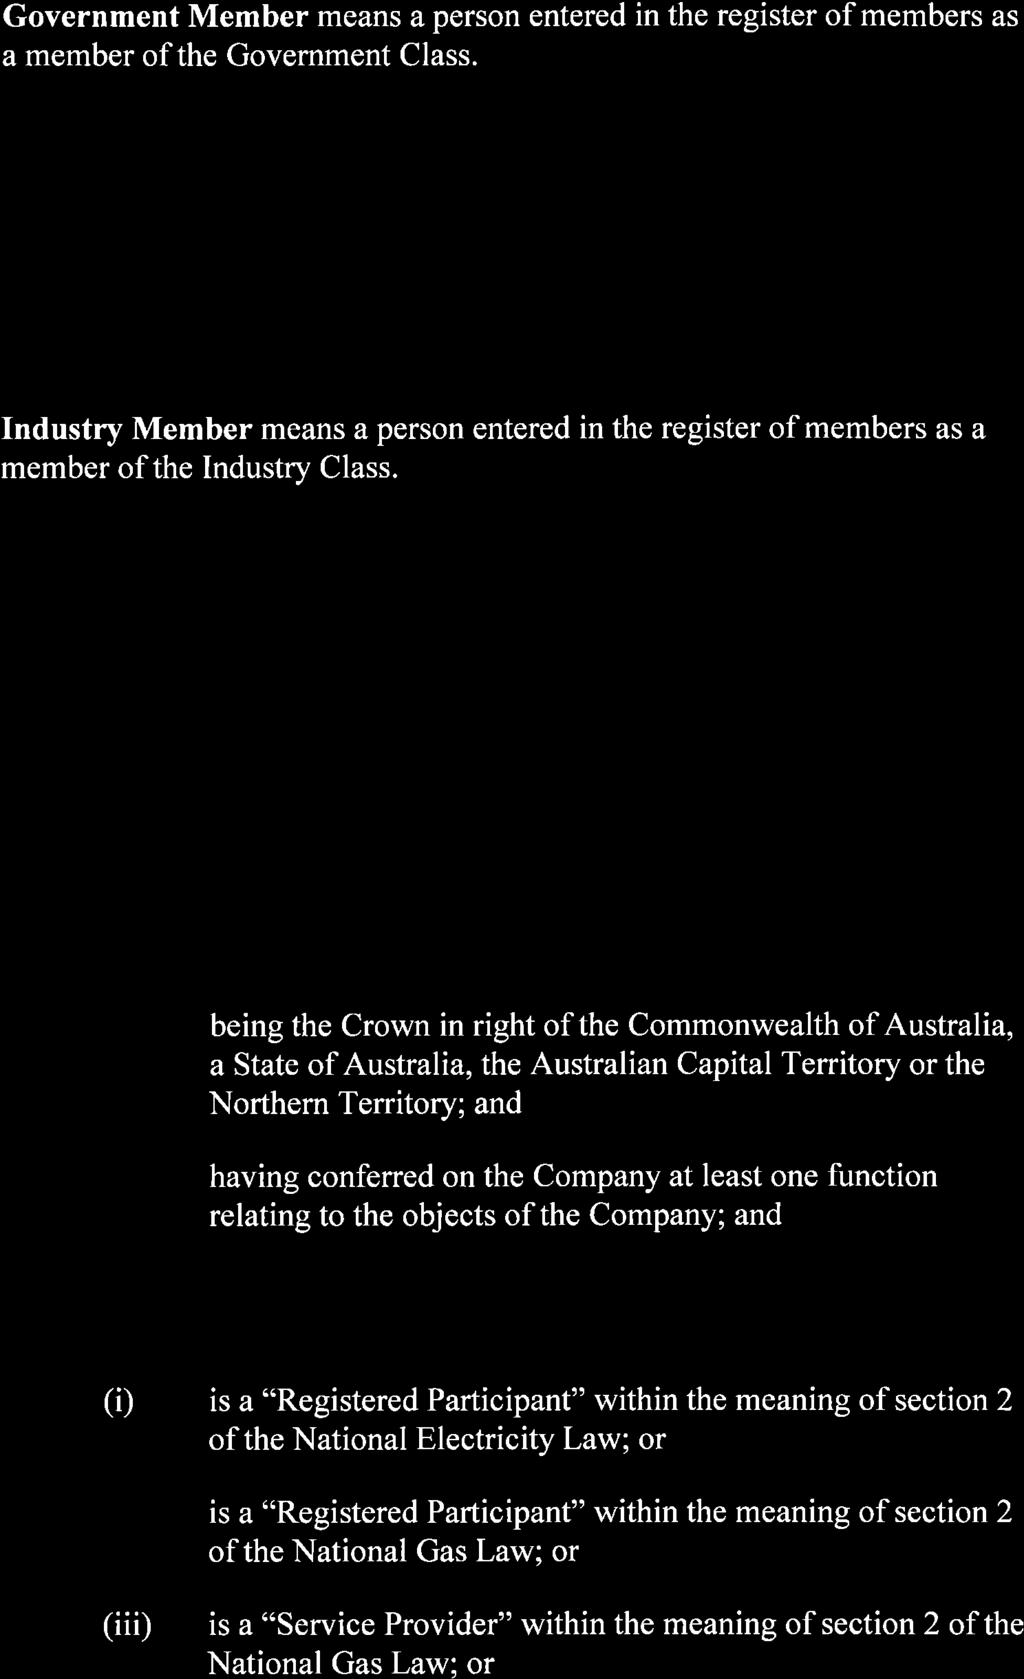 Industry Class means the class of Member referred to in article 4.9. Industry Member means a person entered in the register of members as a member of the Industry Class.